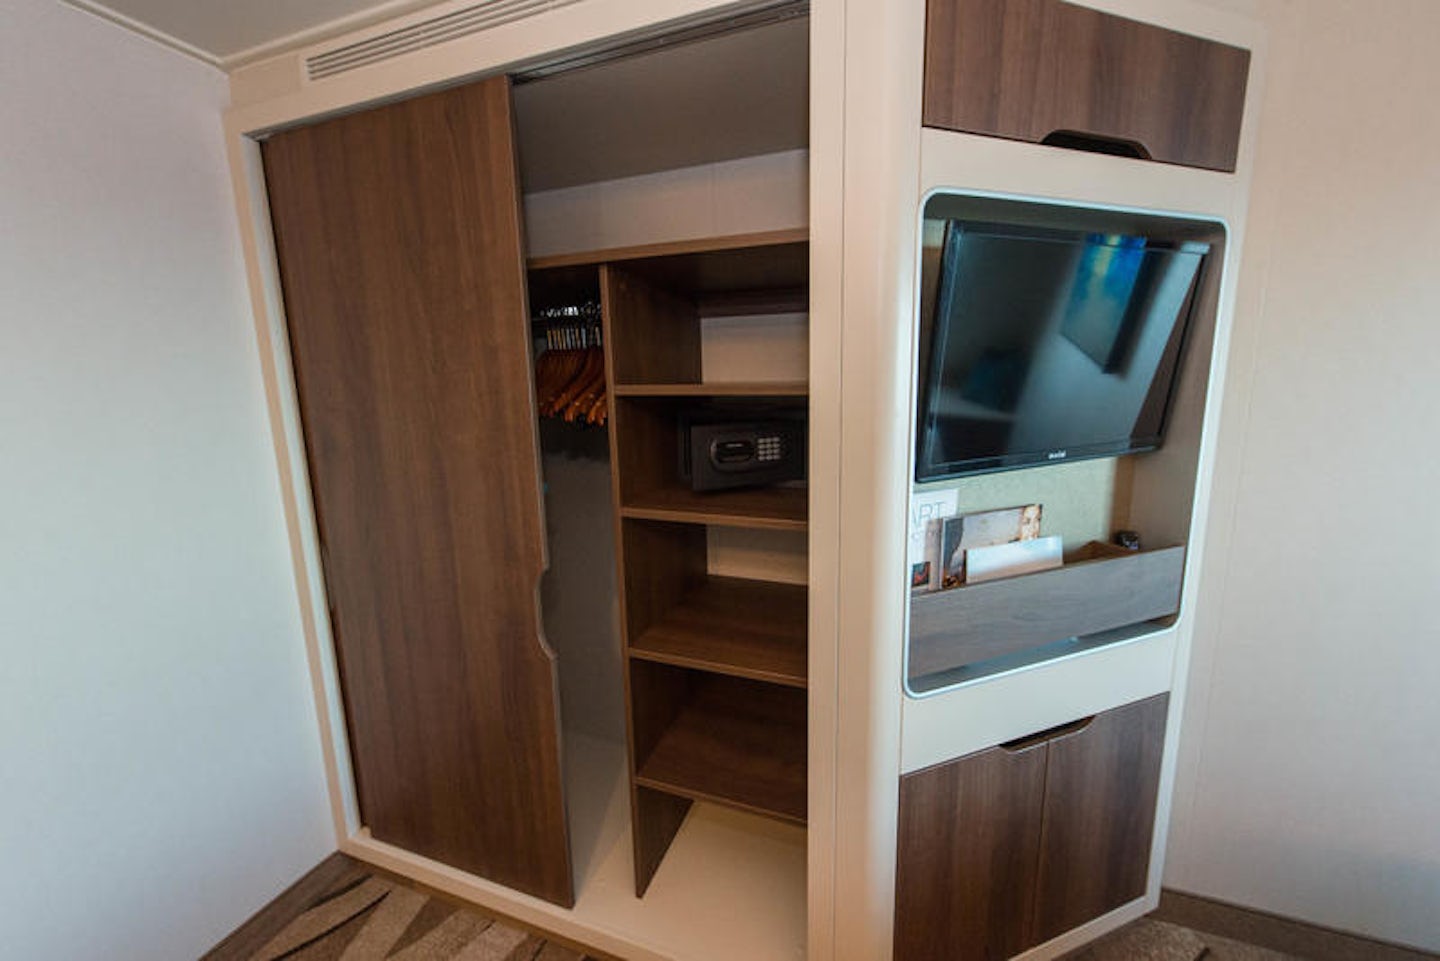 The Large Oceanview Cabin on Norwegian Escape